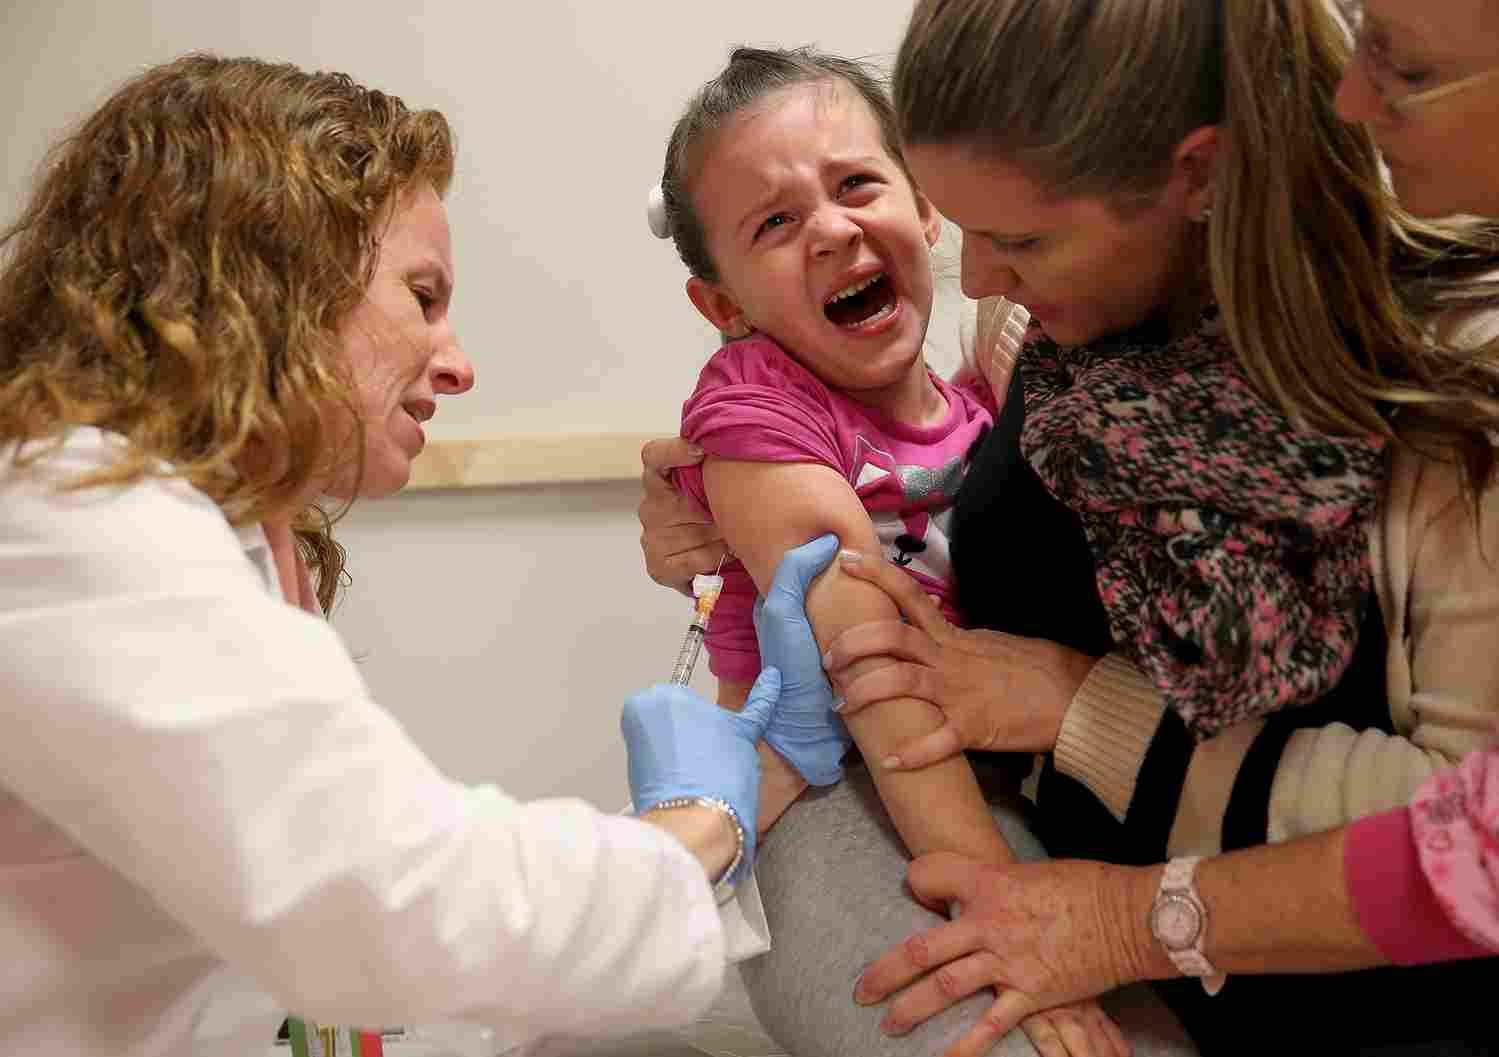 STUDY: Vaccinated children “significantly less healthy” than unvaccina